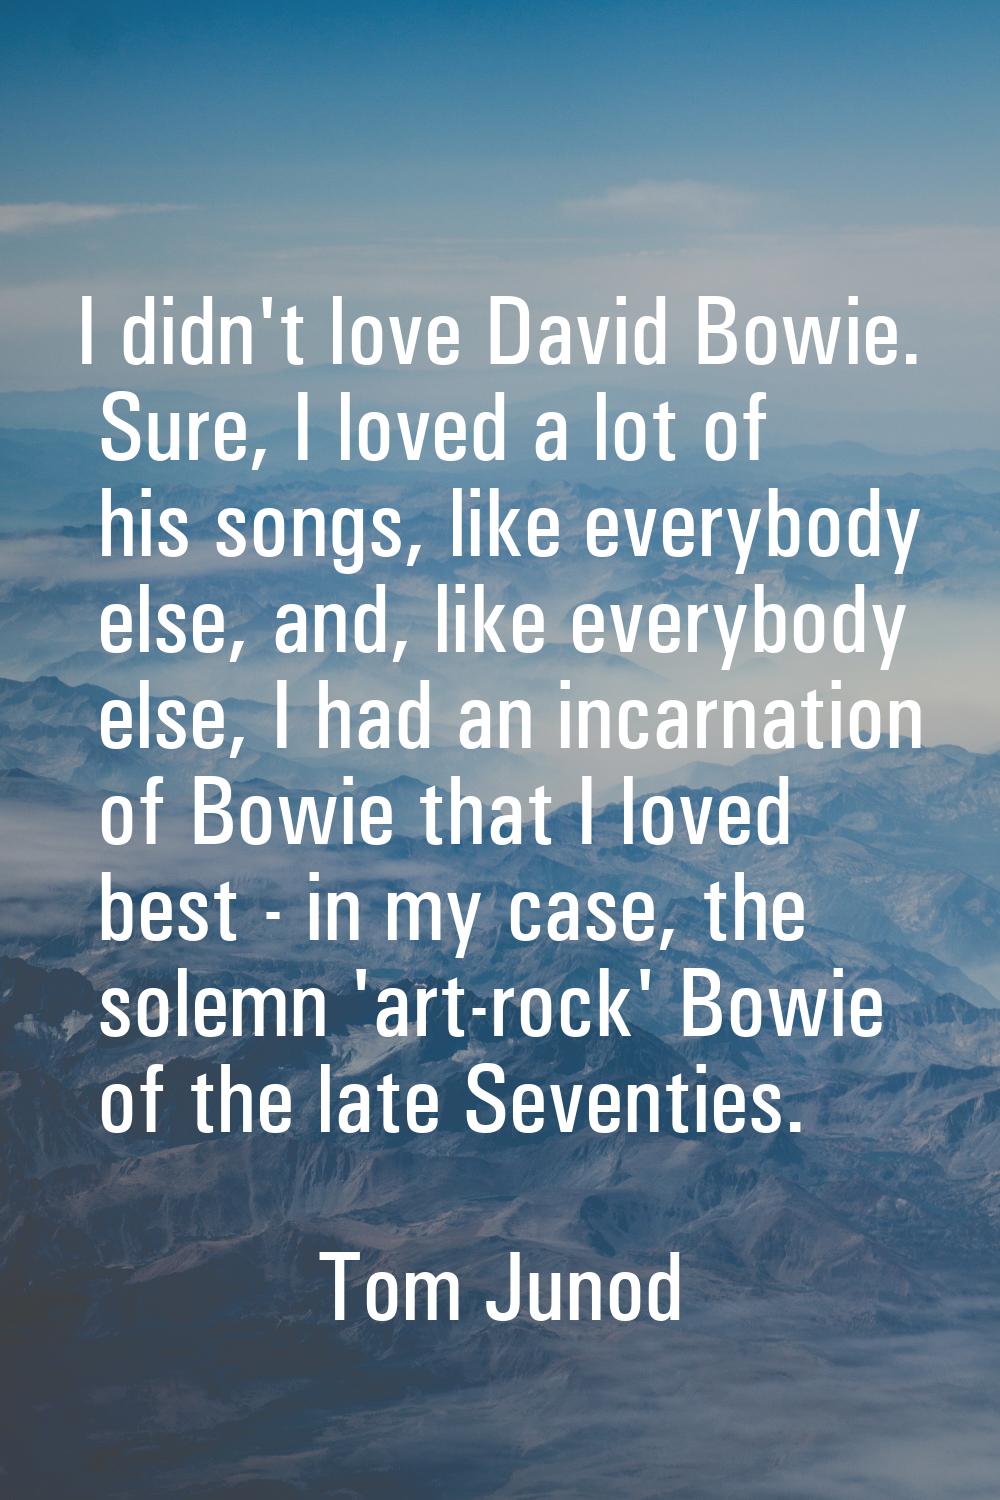 I didn't love David Bowie. Sure, I loved a lot of his songs, like everybody else, and, like everybo